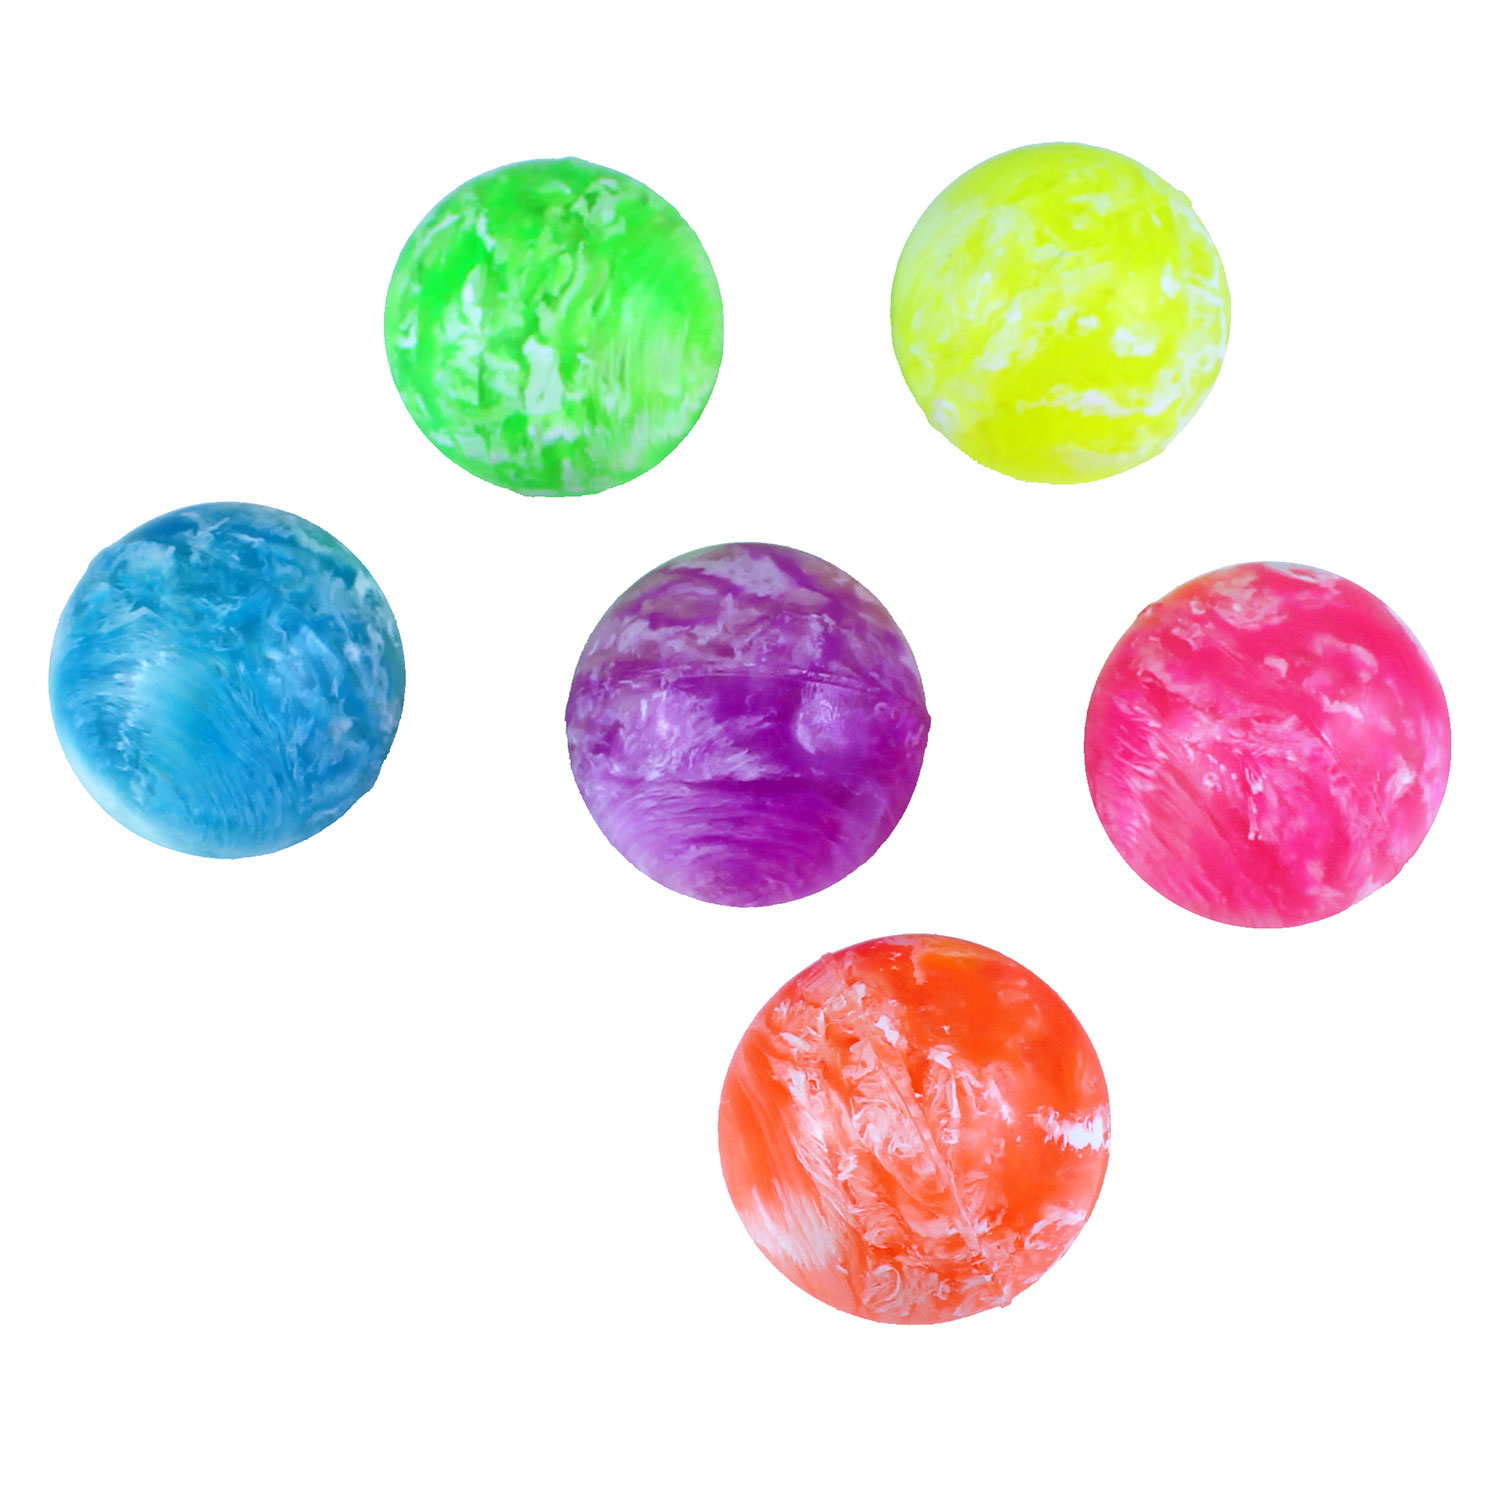 Marbleized Bouncy Balls - 1 3/4 Inches (45mm) - 24 Count: Rebecca's ...